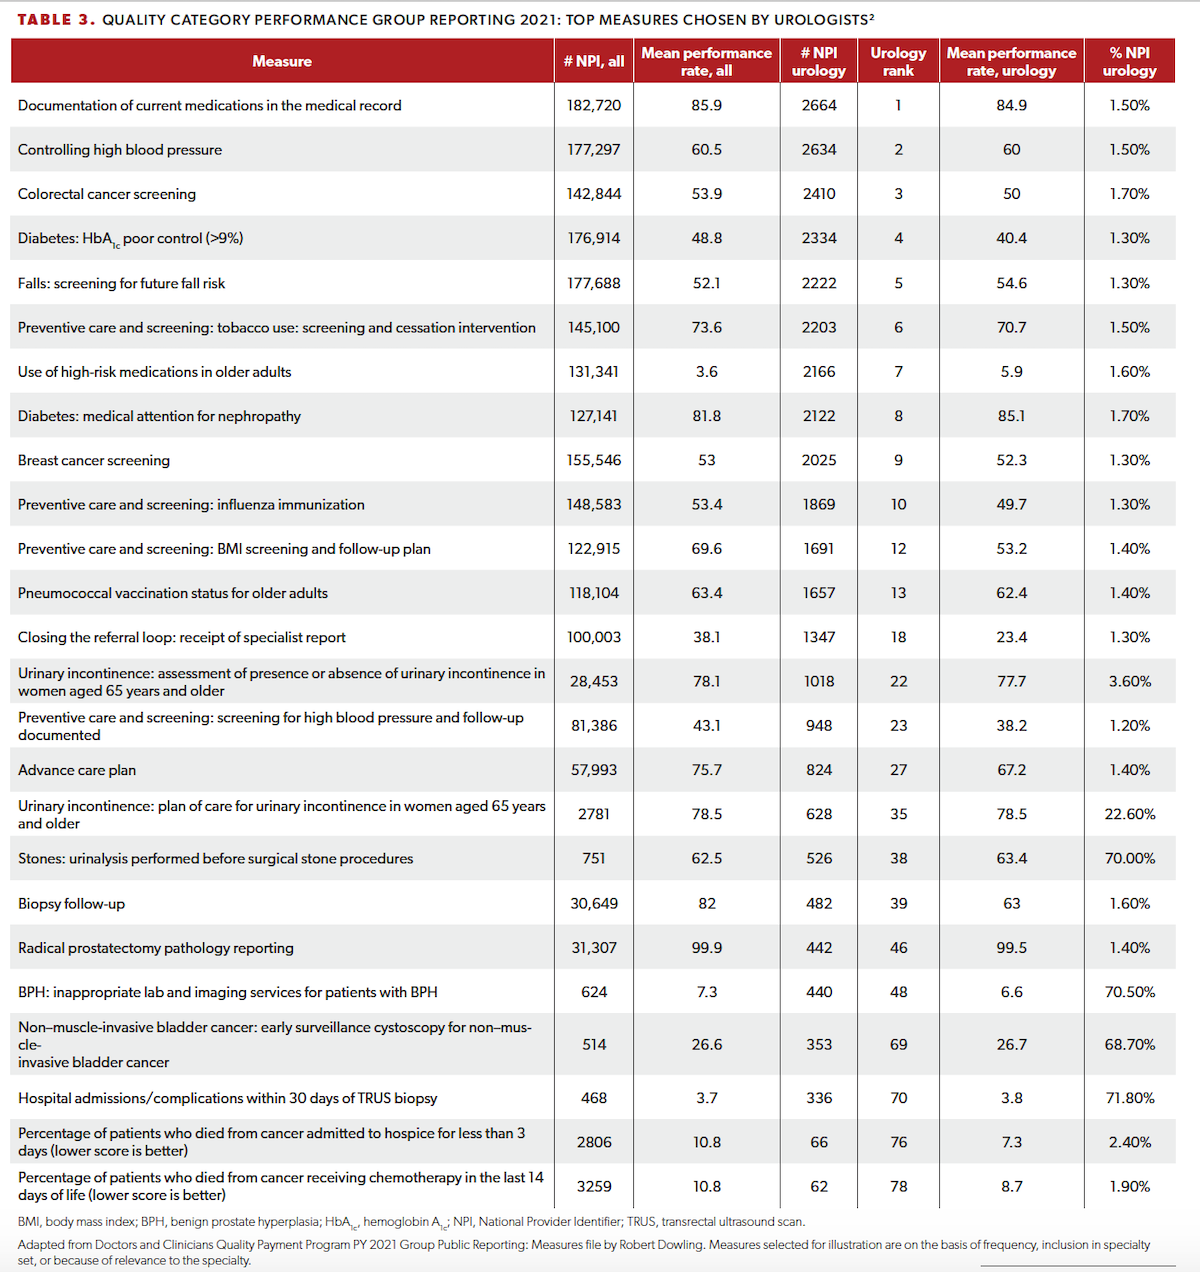 Table 3. Quality Category Performance Group Reporting 2021: Top Measures Chosen by Urologists